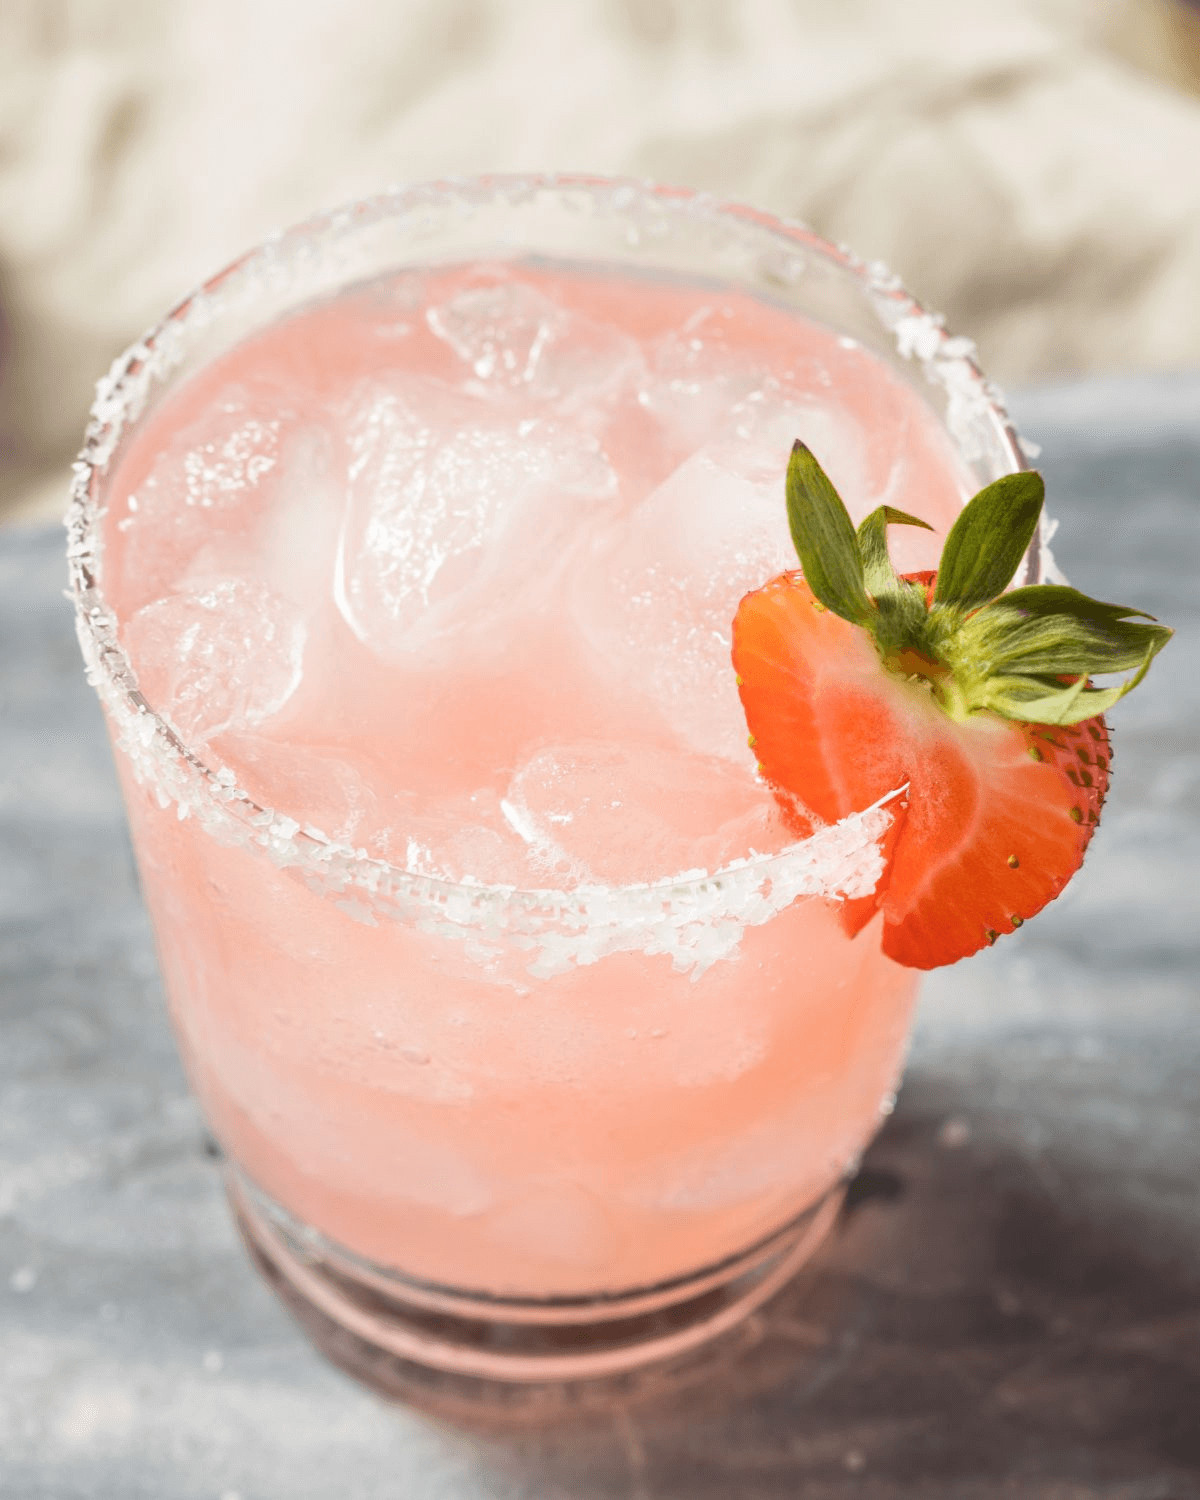 A short glass of the strawberry margarita on the rocks.